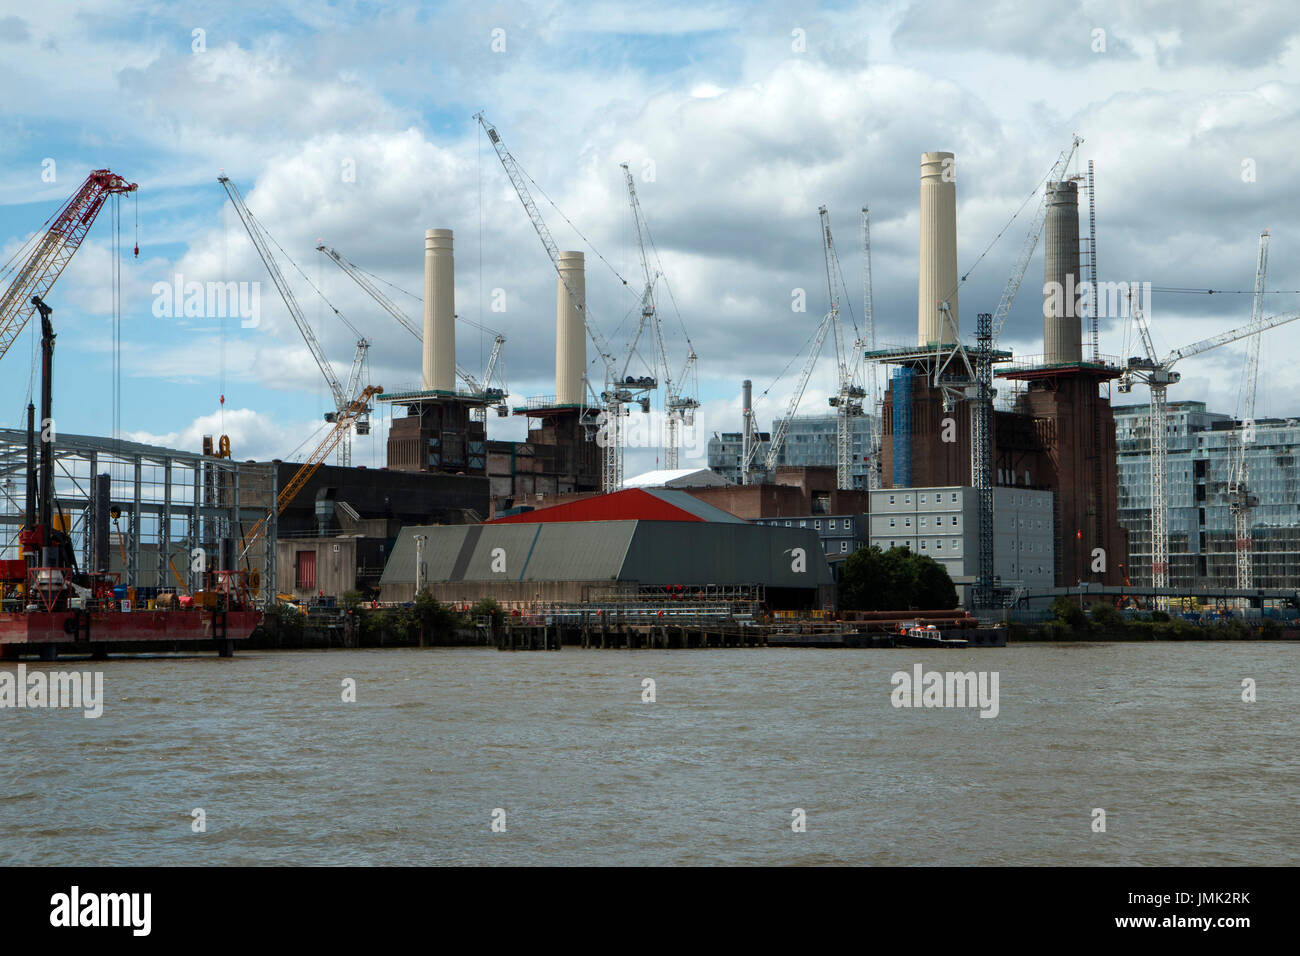 The iconic Battersea Power Station, London UK undergoing extensive redevelopment. Taken from a boat on the River Thames Stock Photo